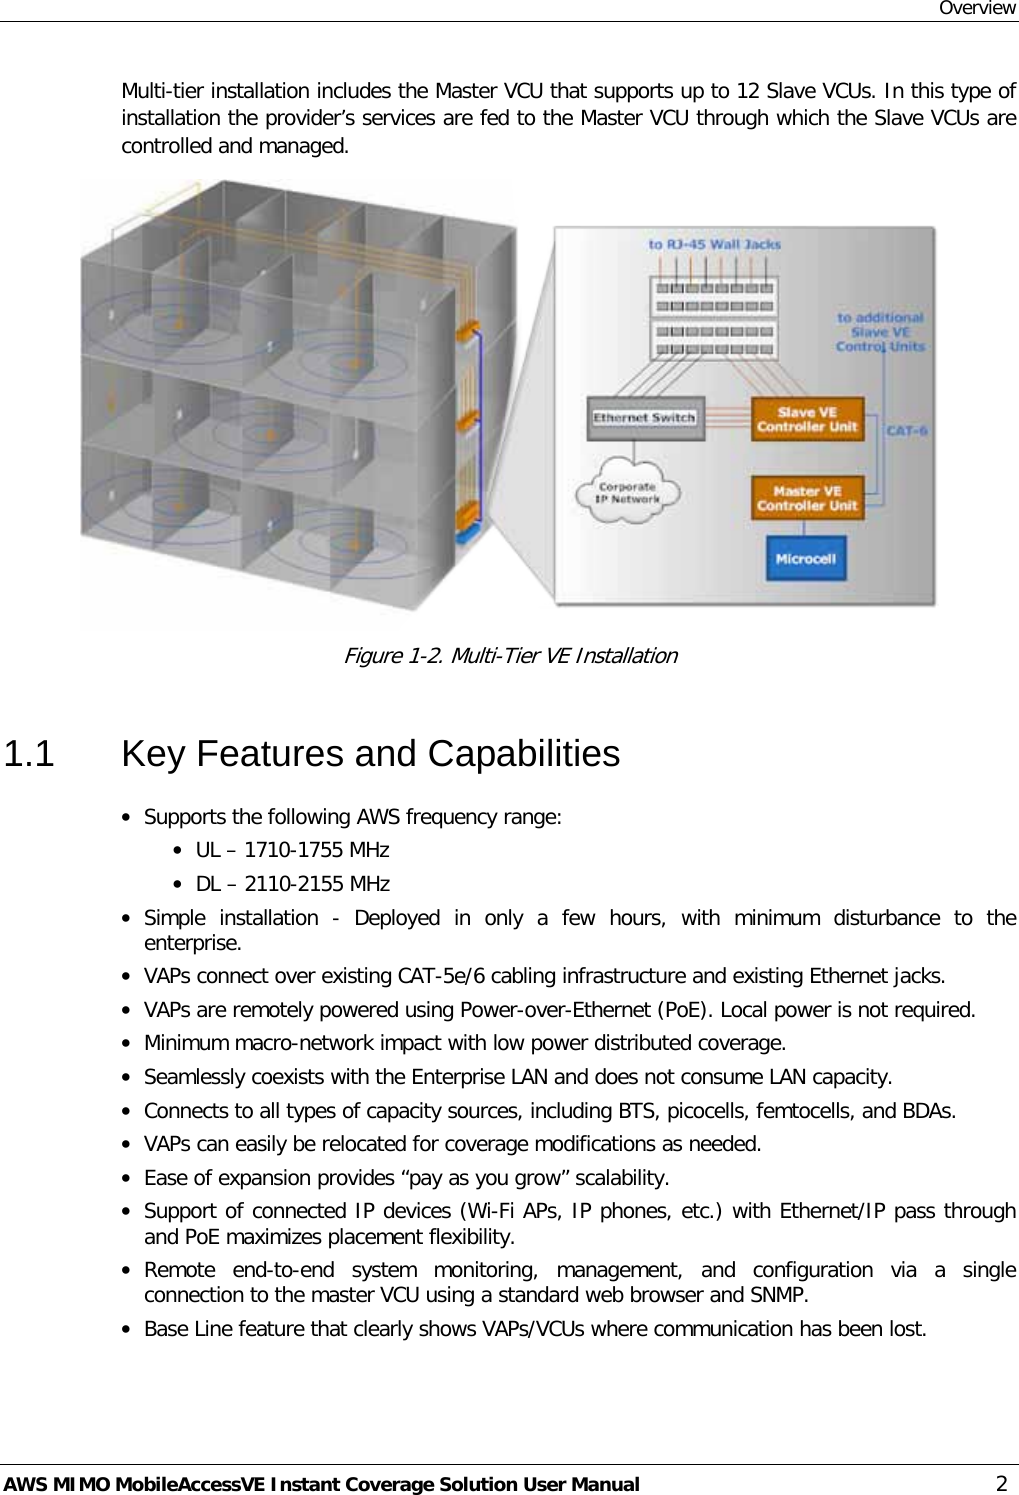 Overview AWS MIMO MobileAccessVE Instant Coverage Solution User Manual  2 Multi-tier installation includes the Master VCU that supports up to 12 Slave VCUs. In this type of installation the provider’s services are fed to the Master VCU through which the Slave VCUs are controlled and managed.   Figure  1-2. Multi-Tier VE Installation 1.1  Key Features and Capabilities • Supports the following AWS frequency range: • UL – 1710-1755 MHz • DL – 2110-2155 MHz • Simple installation -  Deployed in only a few hours, with minimum disturbance to the enterprise. • VAPs connect over existing CAT-5e/6 cabling infrastructure and existing Ethernet jacks. • VAPs are remotely powered using Power-over-Ethernet (PoE). Local power is not required. • Minimum macro-network impact with low power distributed coverage. • Seamlessly coexists with the Enterprise LAN and does not consume LAN capacity. • Connects to all types of capacity sources, including BTS, picocells, femtocells, and BDAs. • VAPs can easily be relocated for coverage modifications as needed. • Ease of expansion provides “pay as you grow” scalability. • Support of connected IP devices (Wi-Fi APs, IP phones, etc.) with Ethernet/IP pass through and PoE maximizes placement flexibility. • Remote end-to-end system monitoring, management, and configuration via a single connection to the master VCU using a standard web browser and SNMP. • Base Line feature that clearly shows VAPs/VCUs where communication has been lost. 